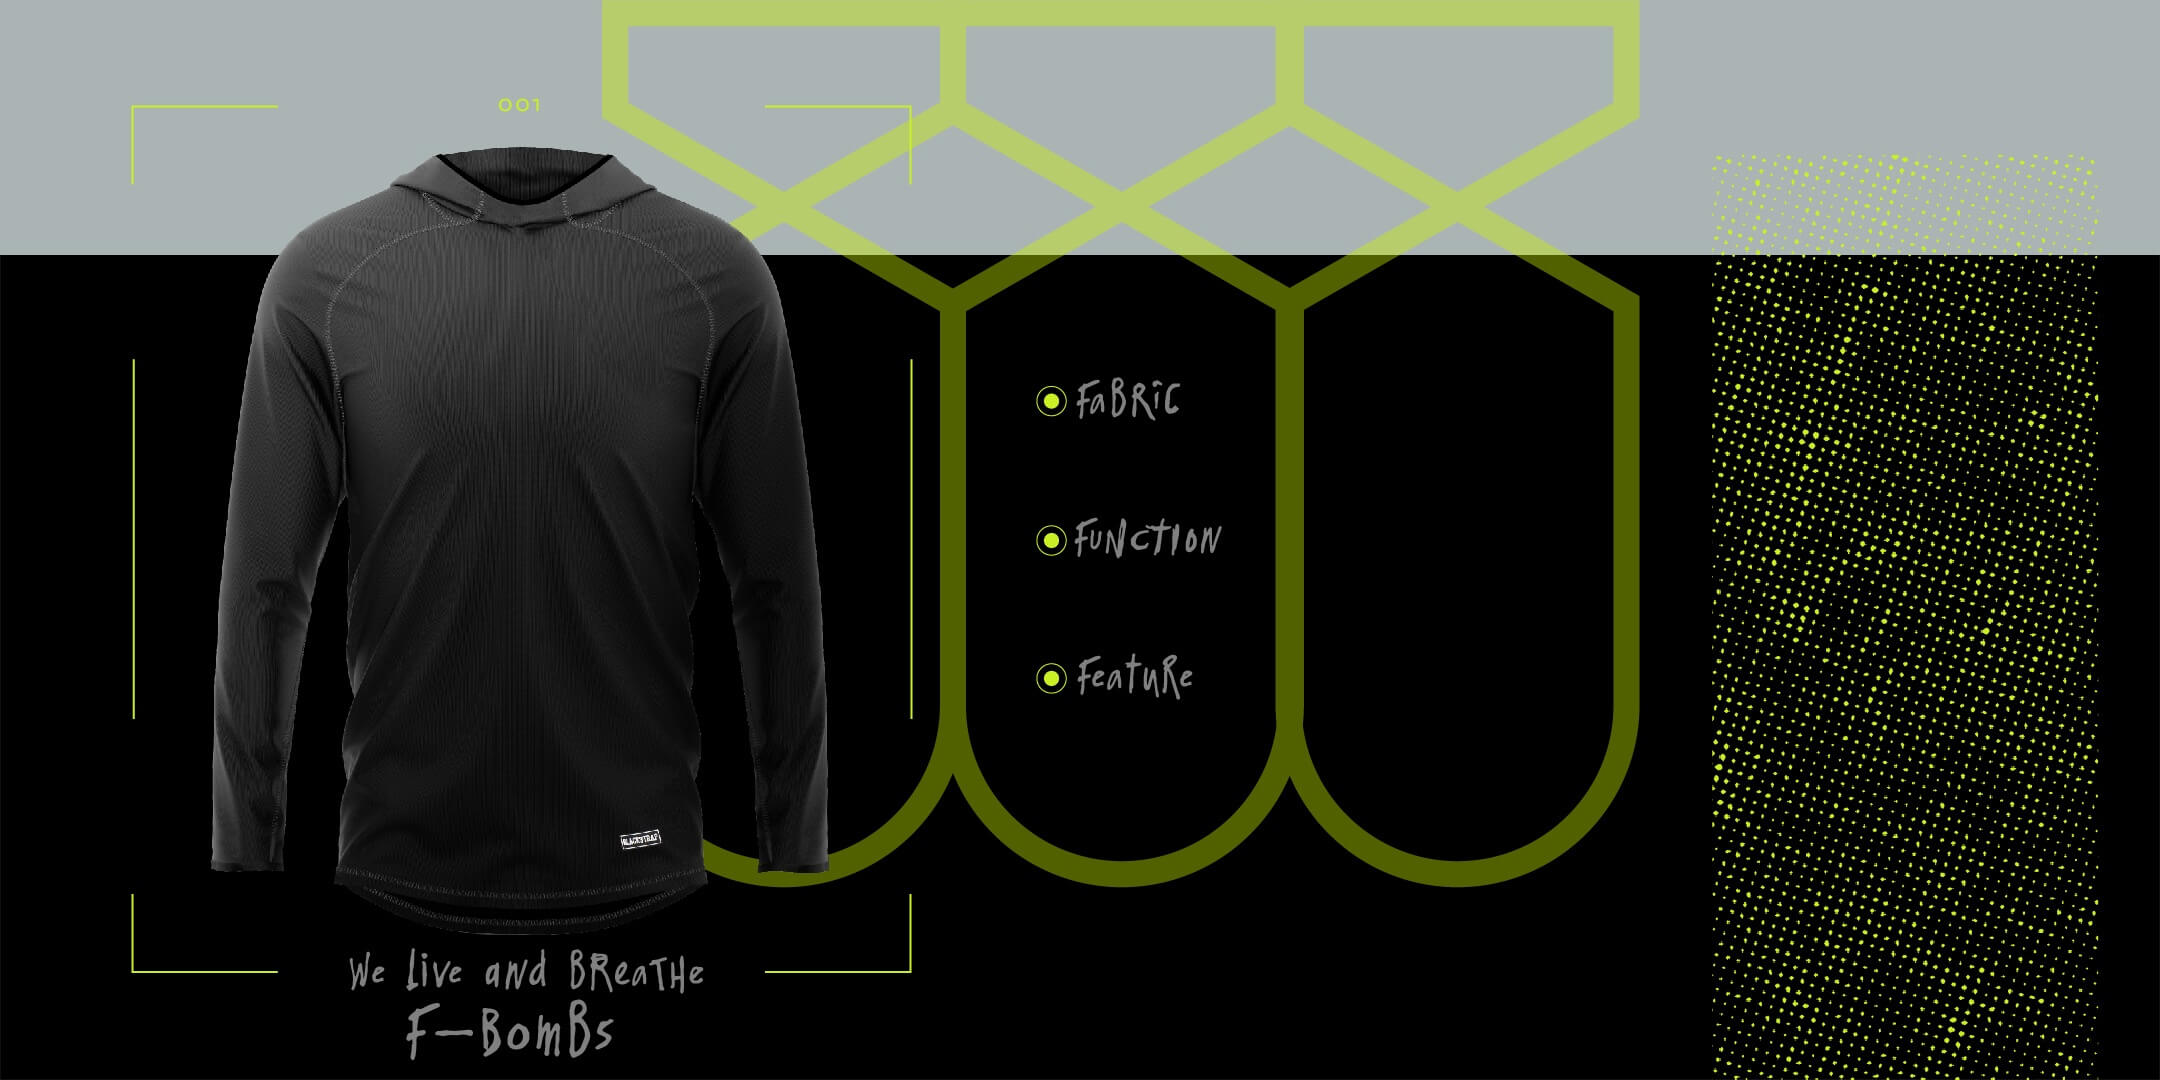 BlackStrap Technology Story - TECH AF, Fabric, Function, Feature